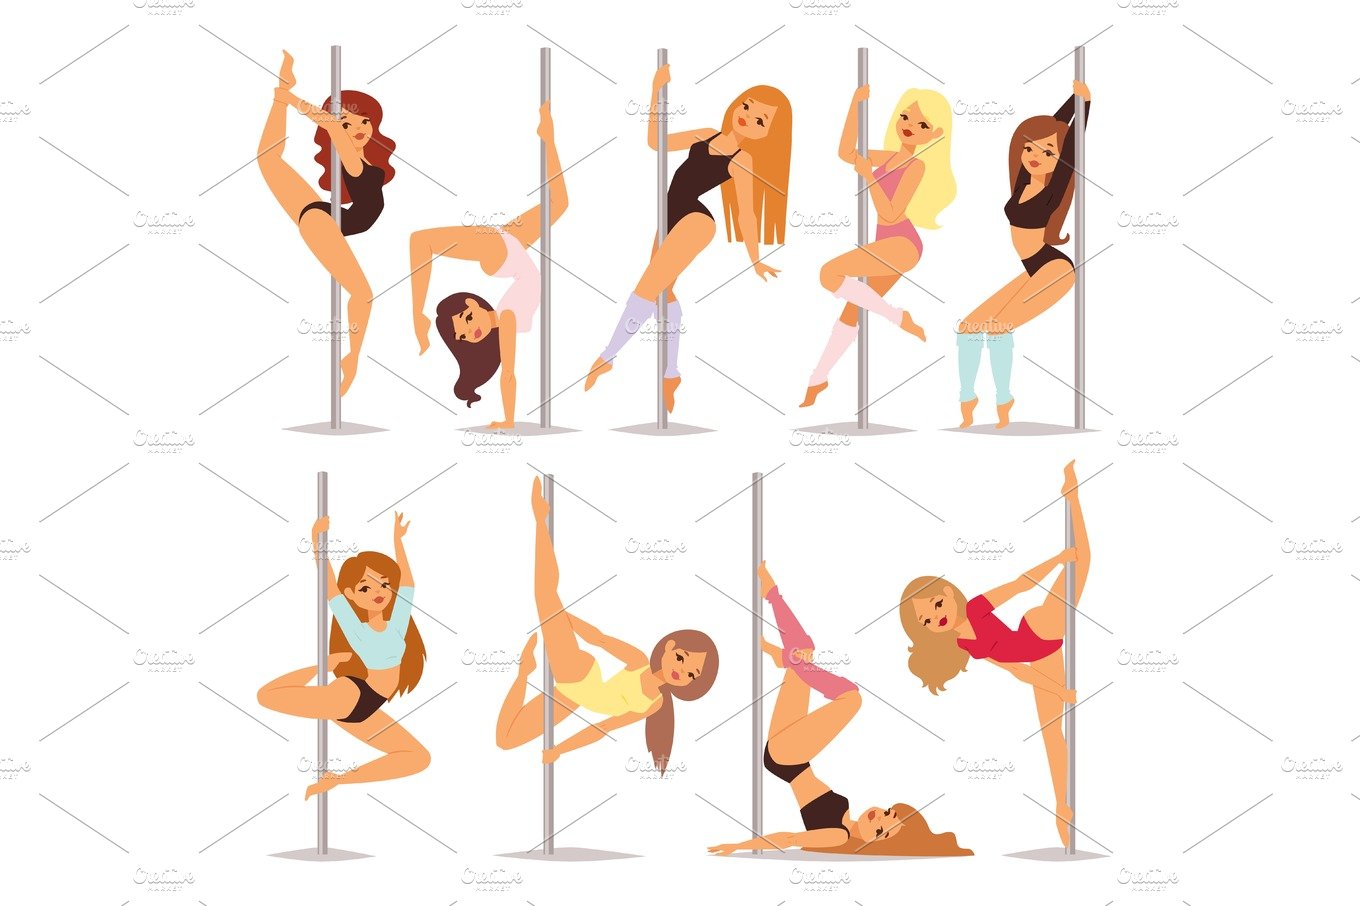 Set of pole dance women cartoon style isolated on white background and youn... cover image.